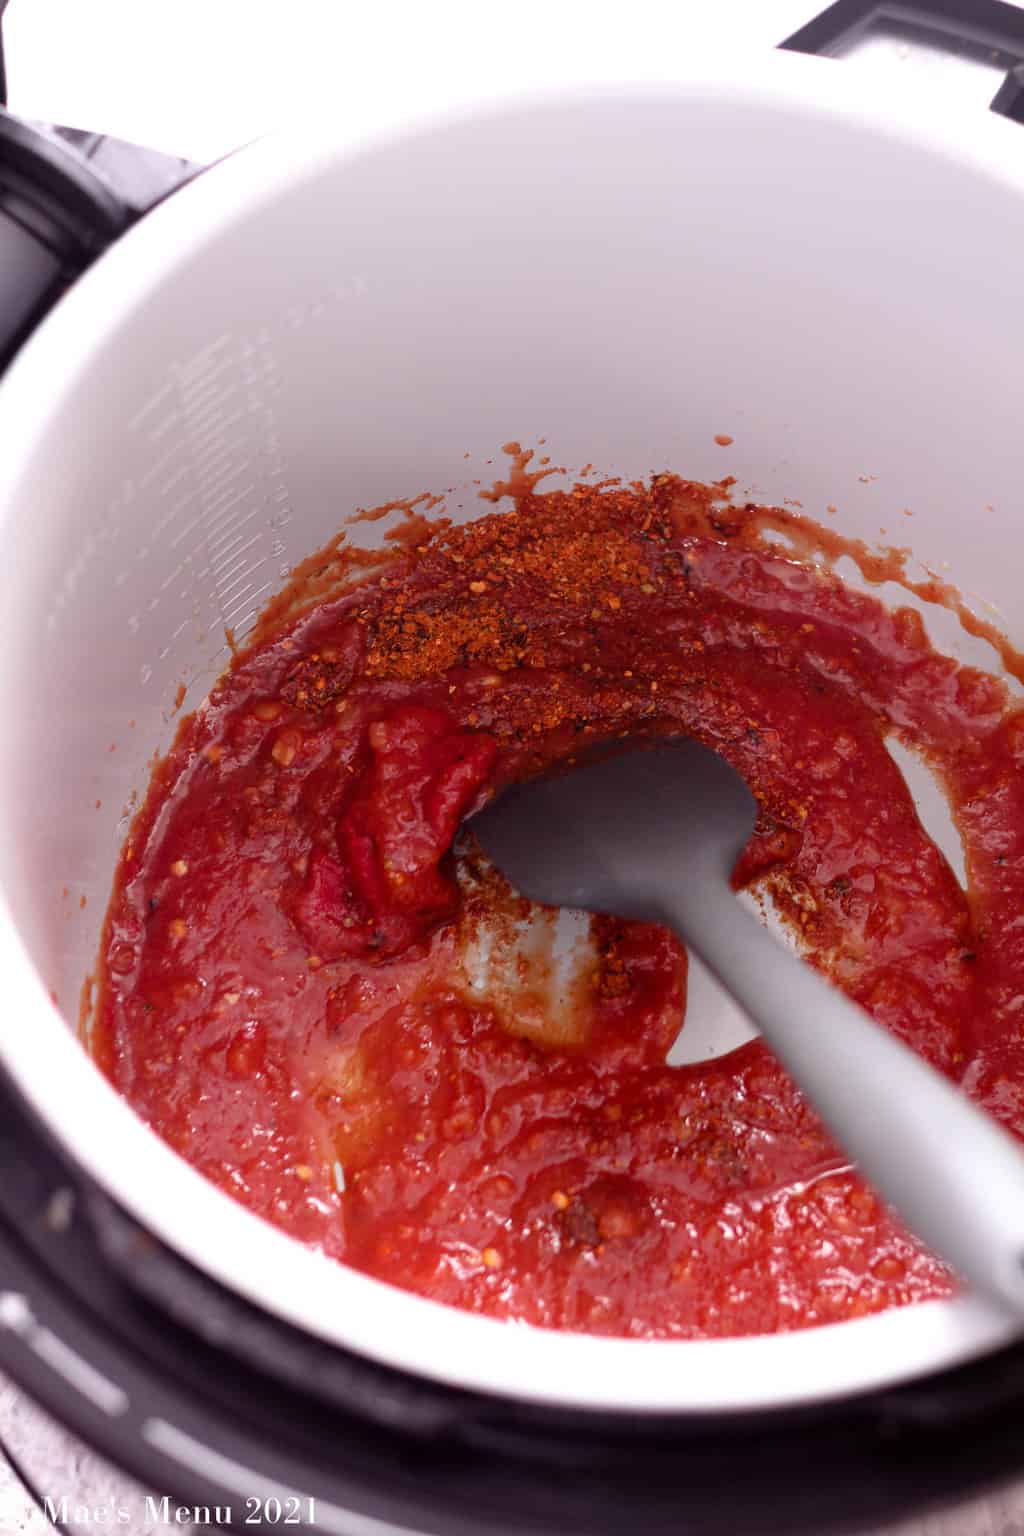 An instant pot with salsa, tomato paste, and seasonings